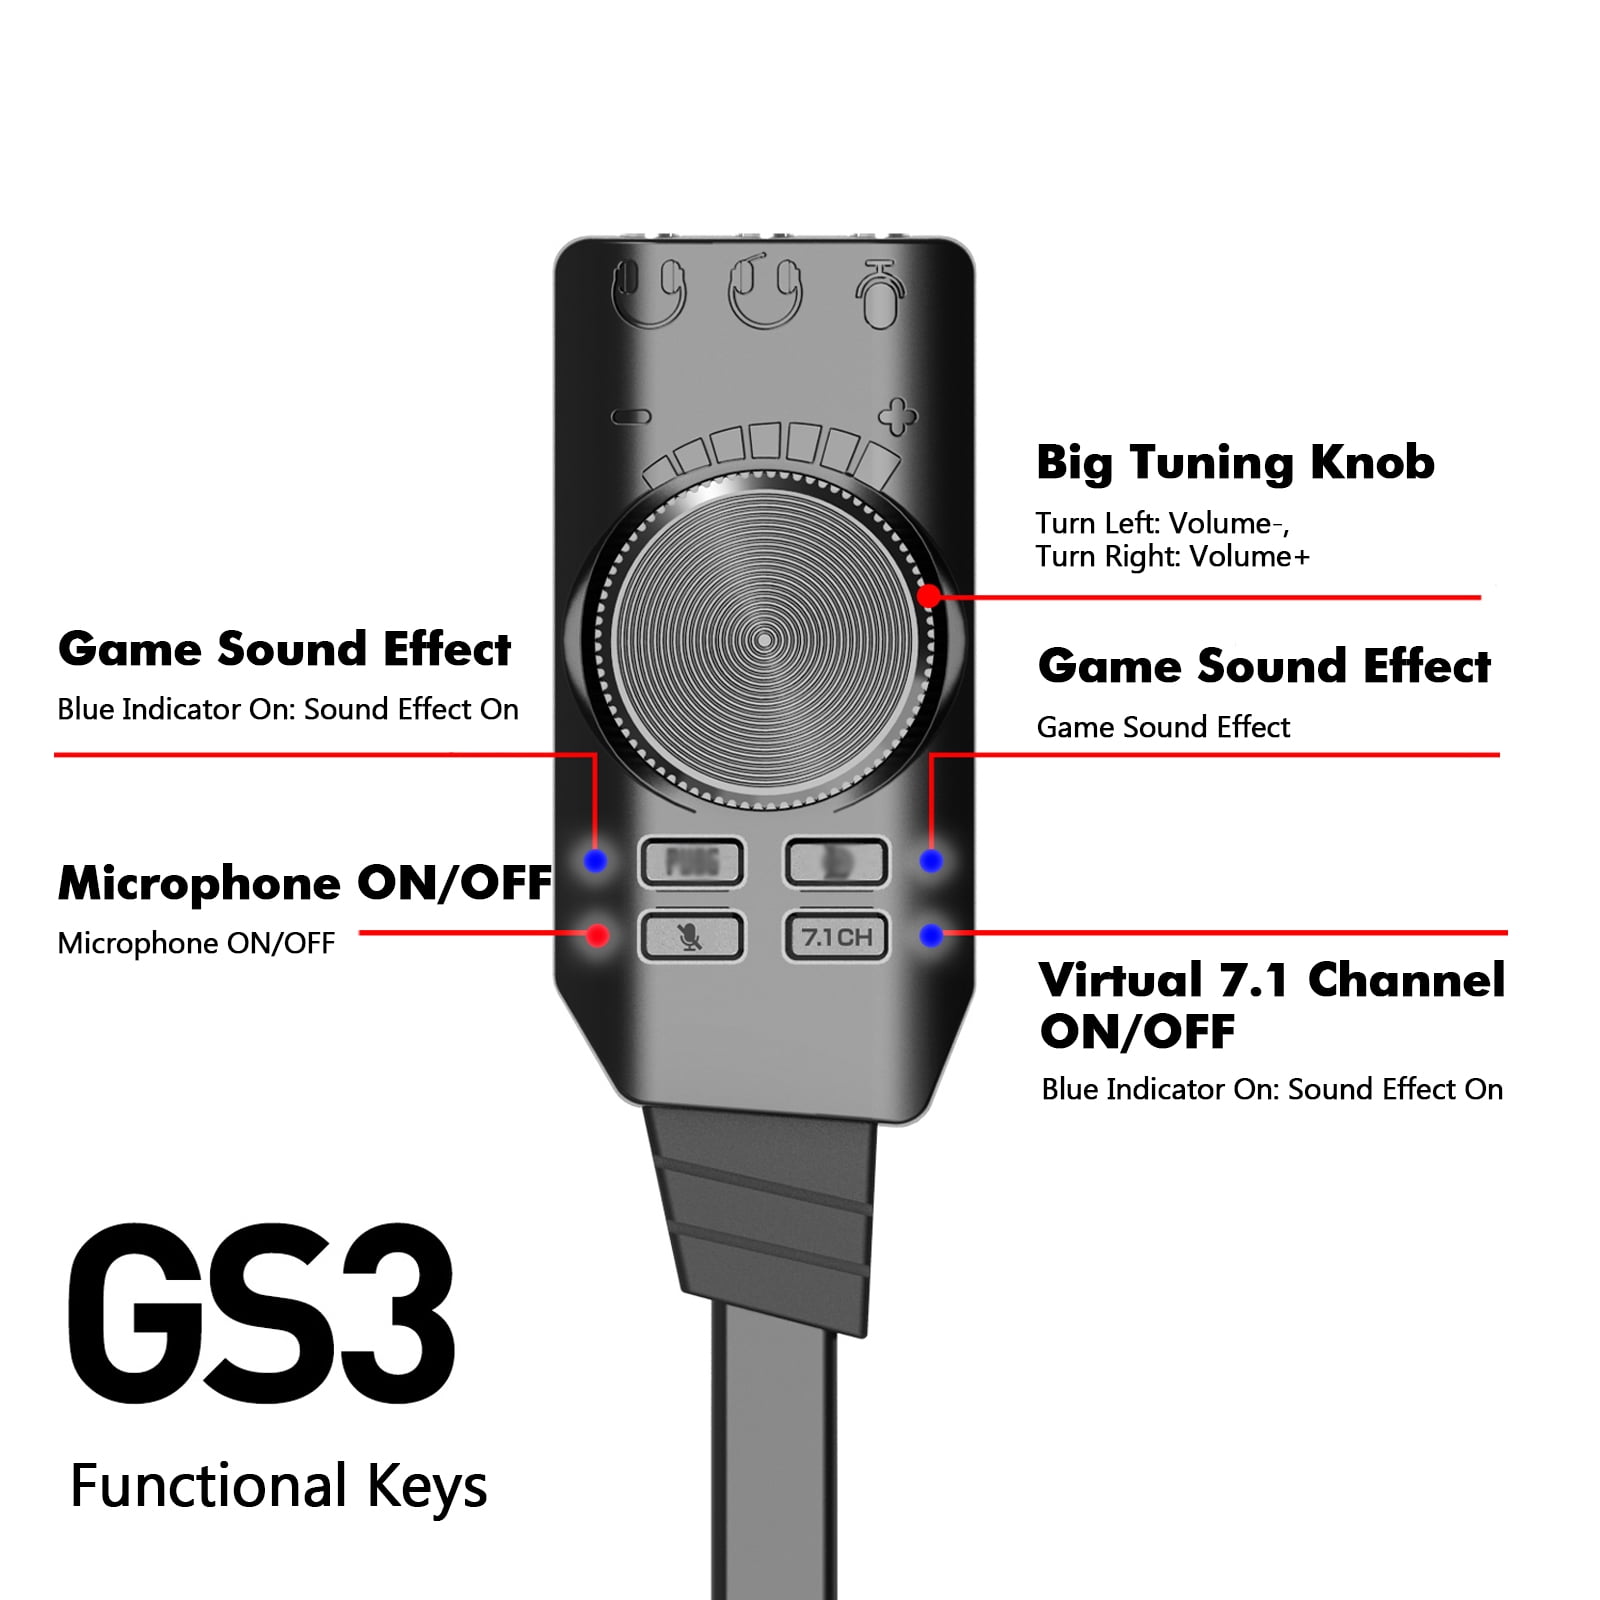 GS3 USB 2.0 External Sound Card Virtual 7.1 Channel Sound Card Adapter Plug and Play with Headphone Microphone Jacks Volume Control Mute Mic Games Sound Effect Upgrade Version for Desktop Laptop PC